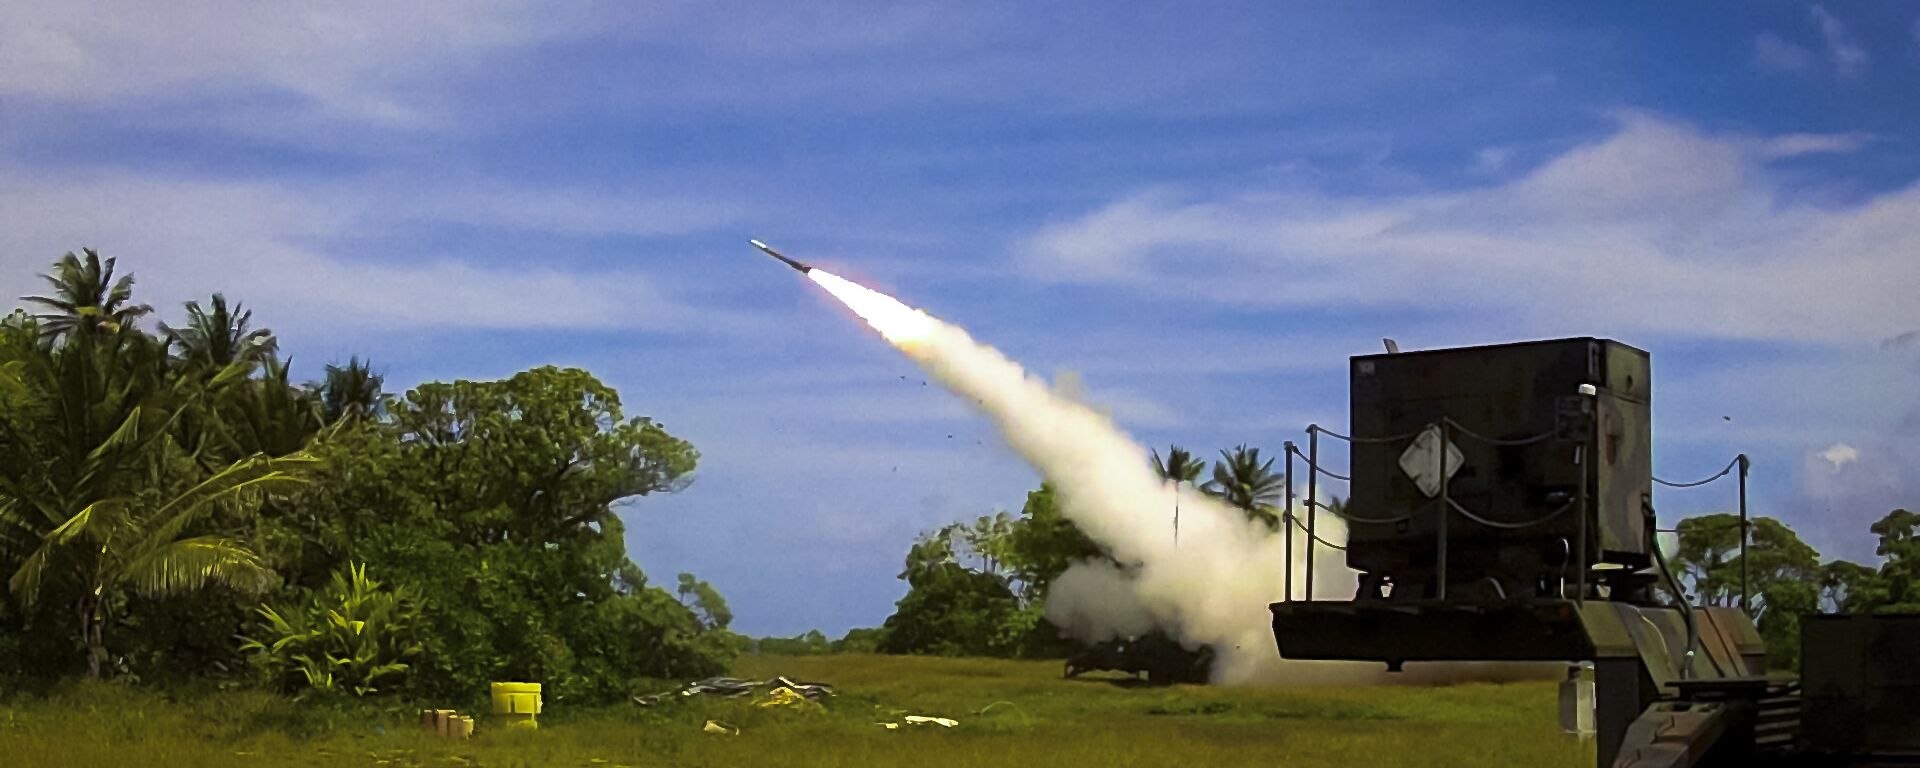 A Patriot Advanced Capability 3 (PAC-3) interceptor is launched from Omelek Island during MDA's historic integrated flight test on Oct. 24, 2012. - Sputnik International, 1920, 16.12.2022